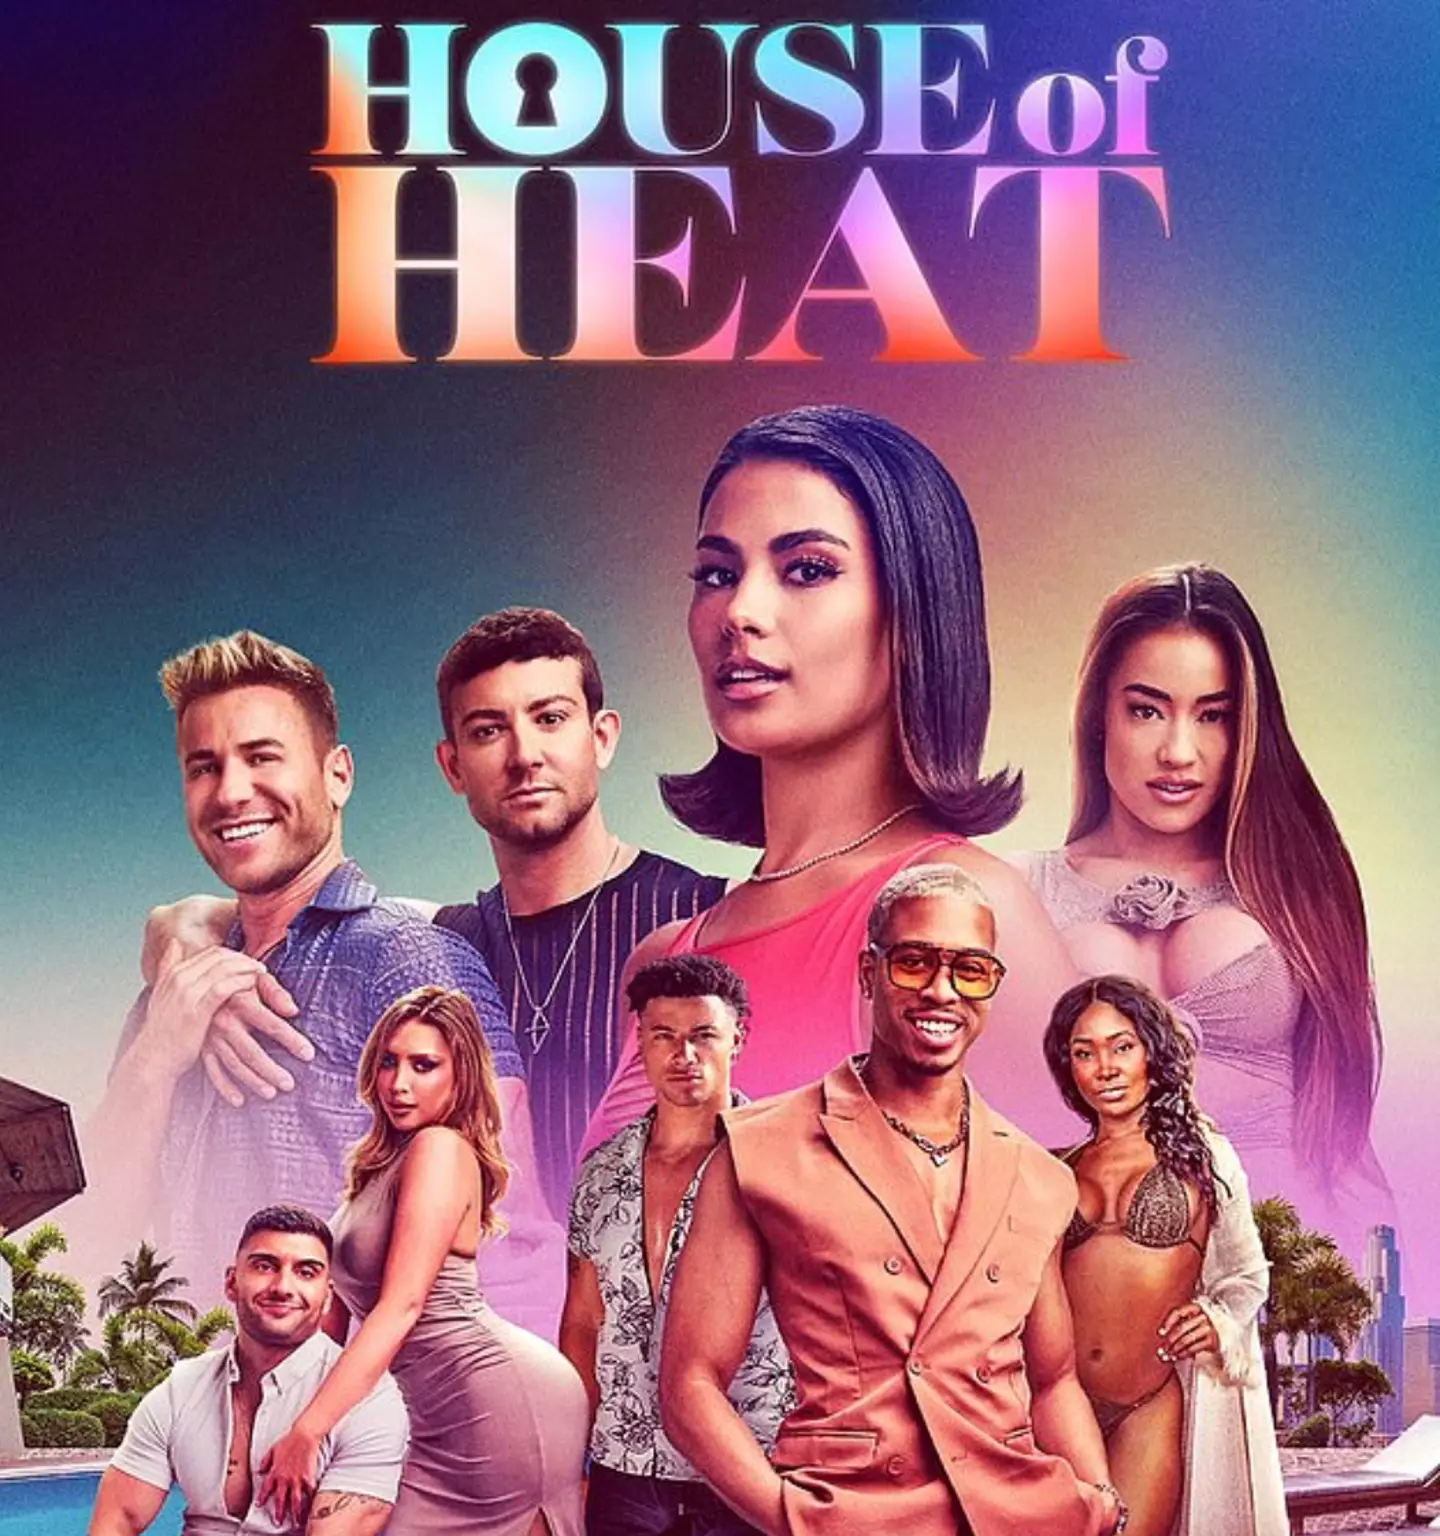 House of Heat is streaming now. (Tubi)